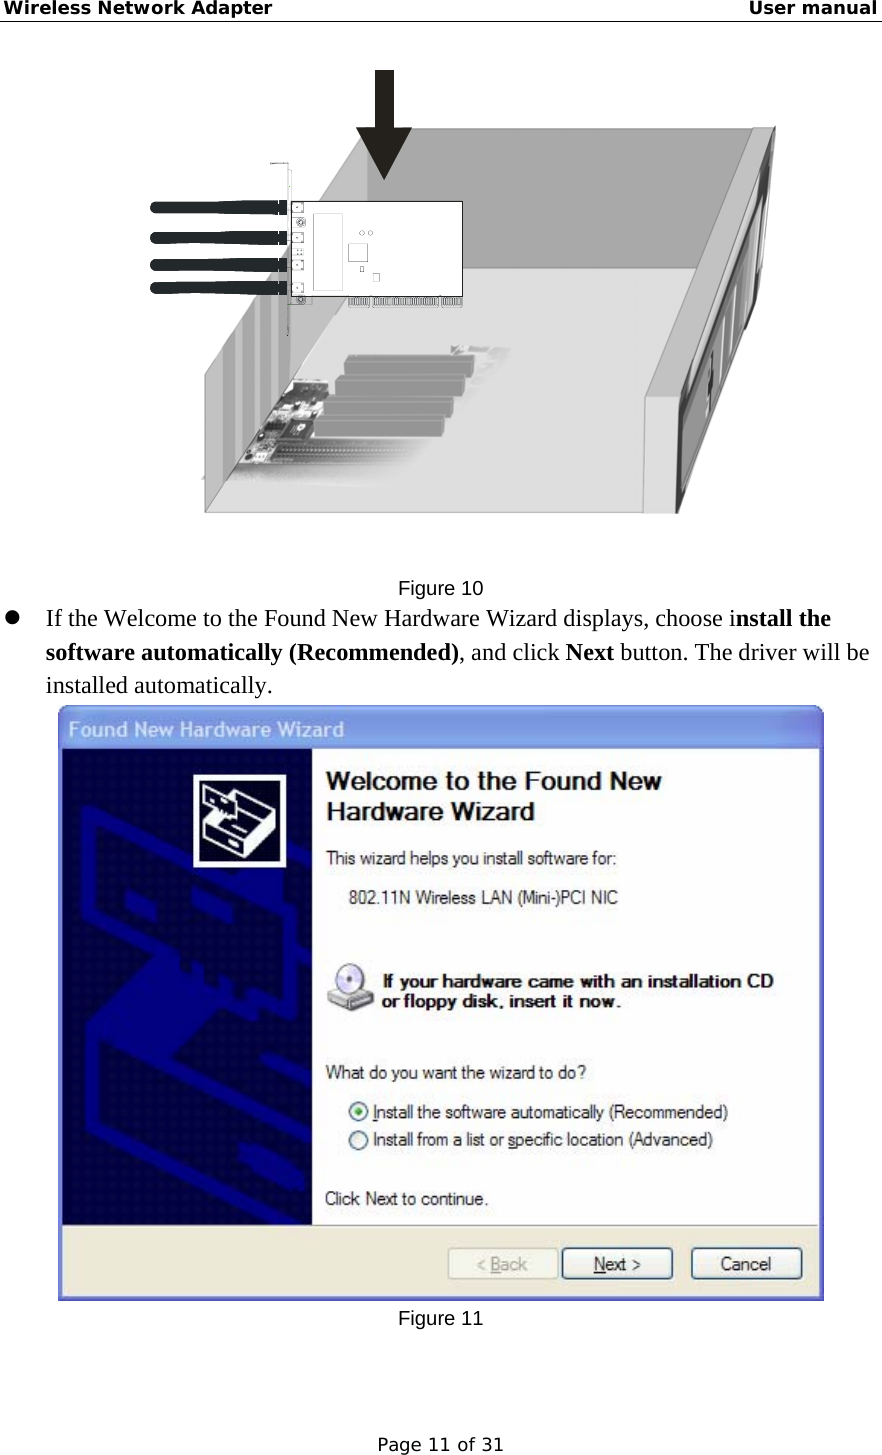 Wireless Network Adapter                                                    User manual Page 11 of 31  Figure 10 z If the Welcome to the Found New Hardware Wizard displays, choose install the software automatically (Recommended), and click Next button. The driver will be installed automatically.  Figure 11 